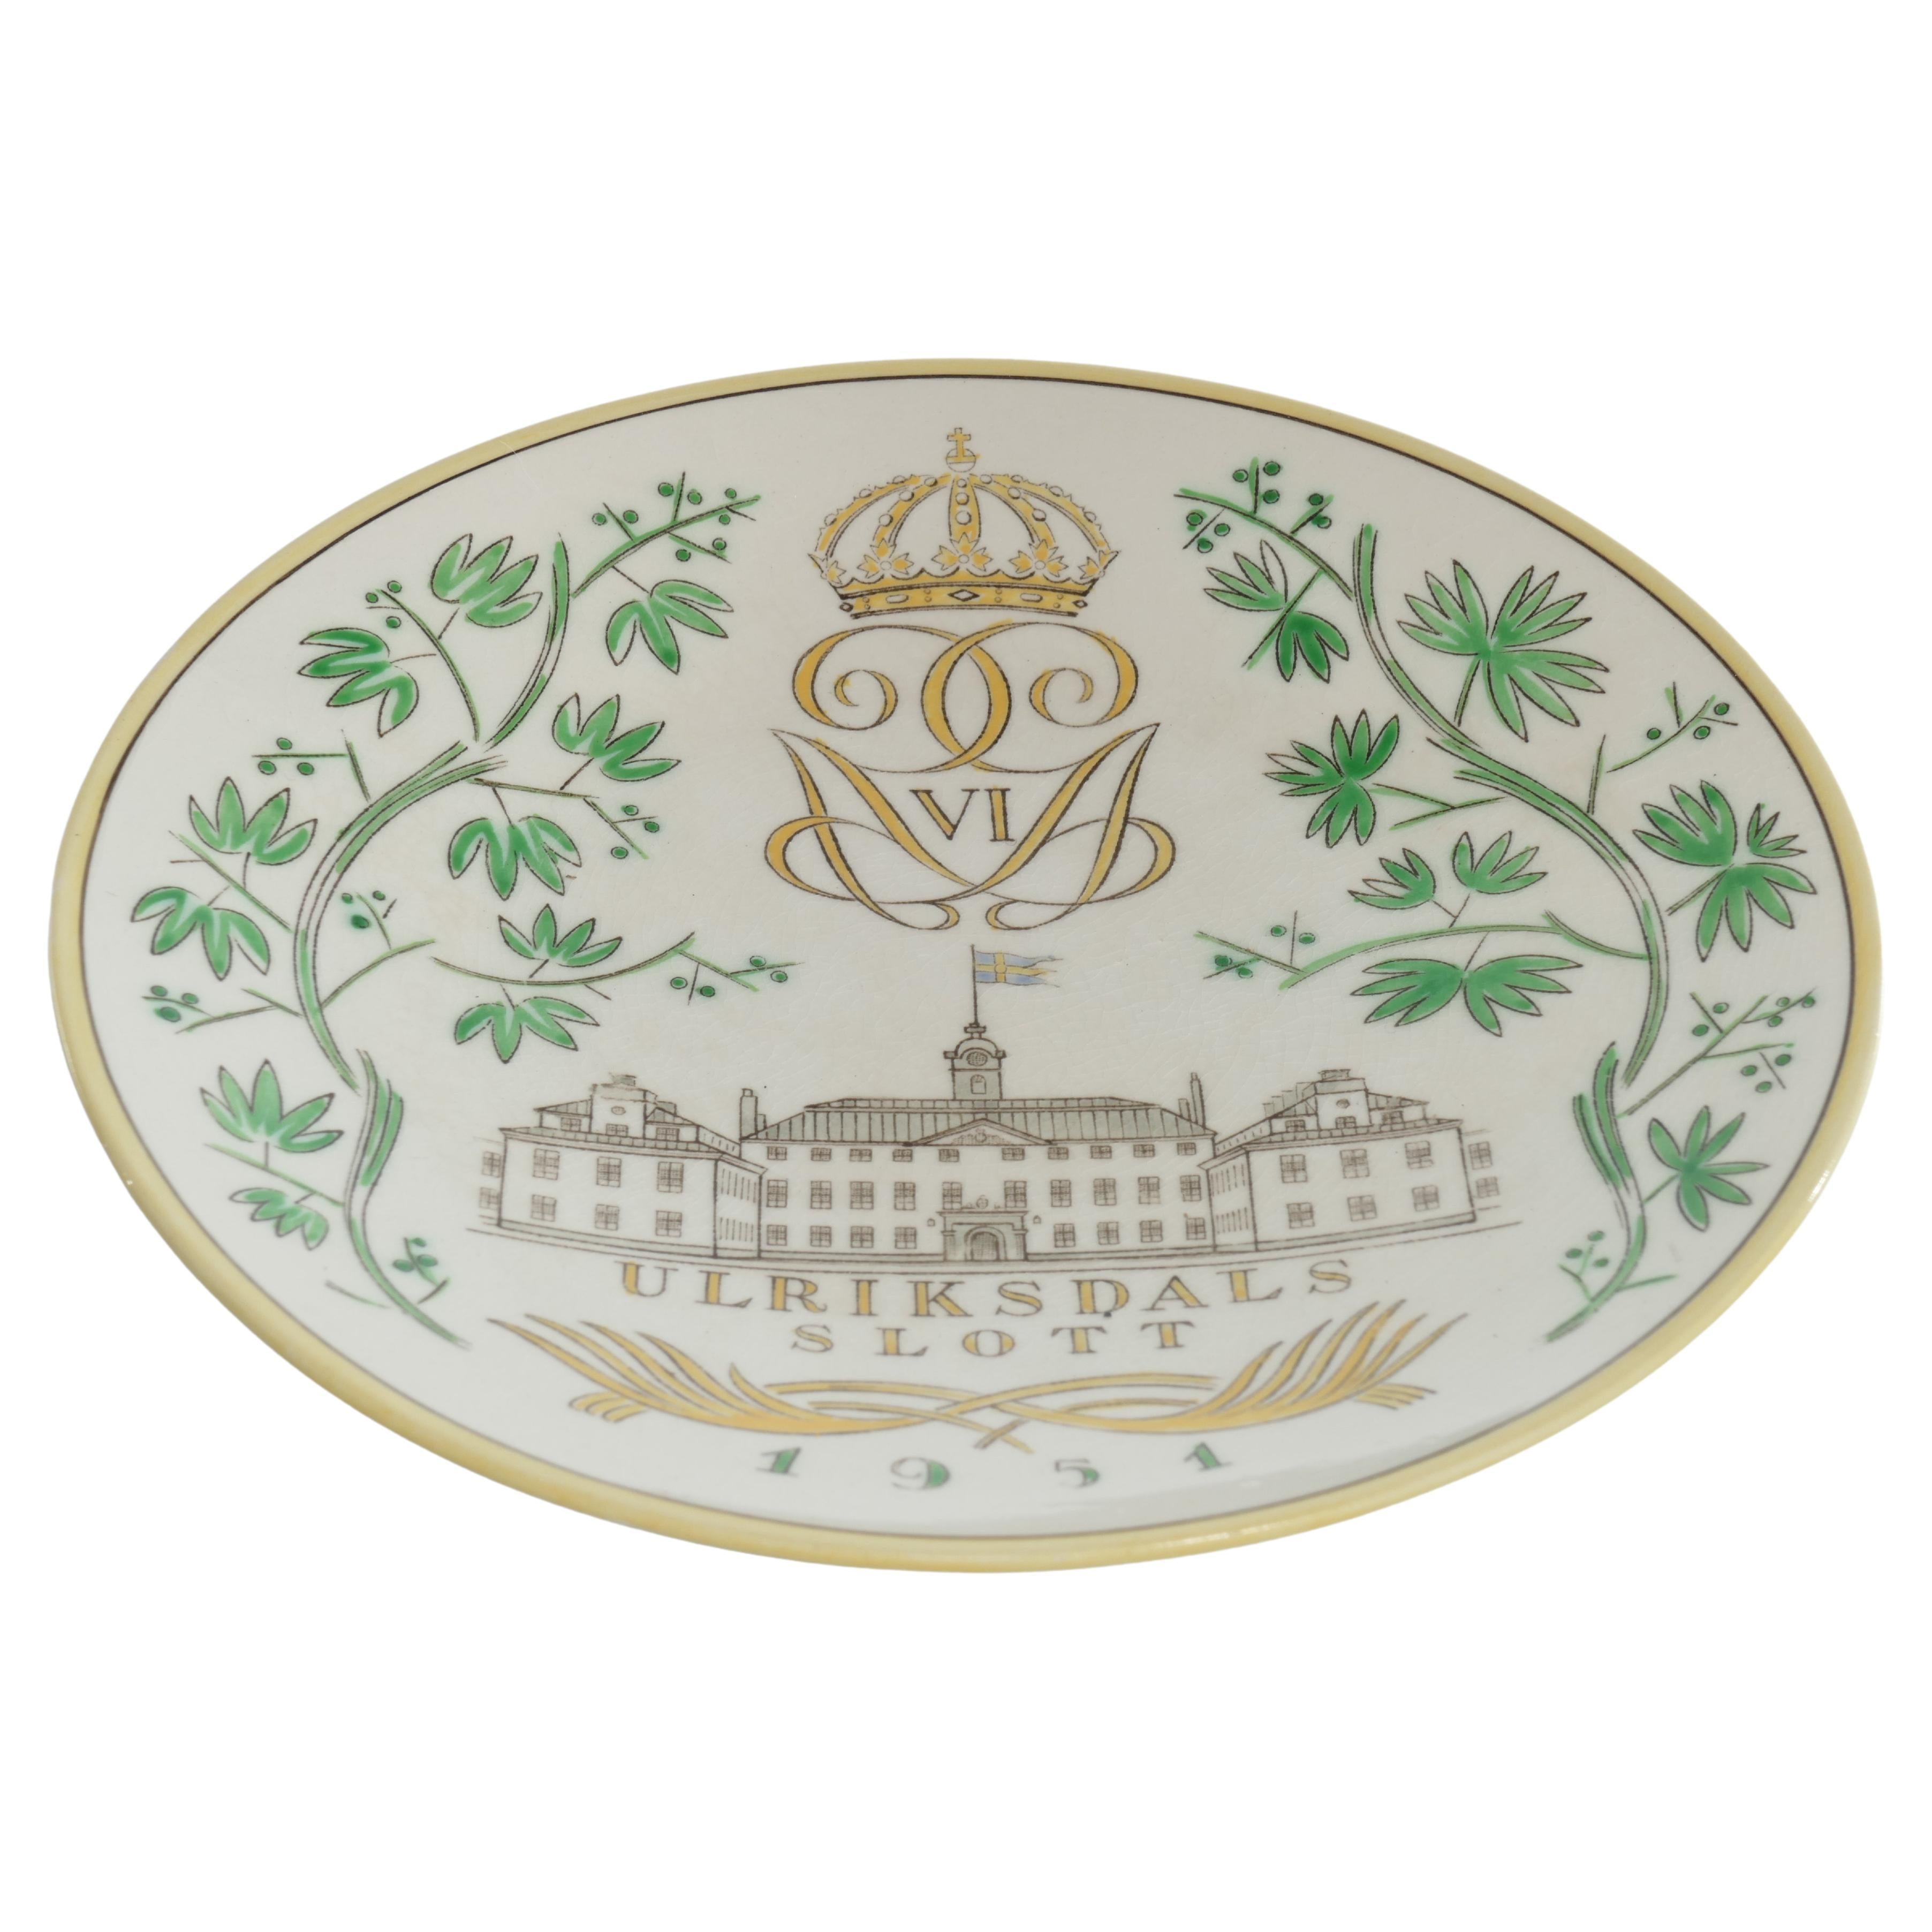 Two stoneware plates depicting the Swedish castle Ulriksdal Palace designed by Arthur Percy and produced by Gefle porslinsfabrik, in 1951.

The pale yellow and green colors, together with the lovely illustration is really capturing the feel of the